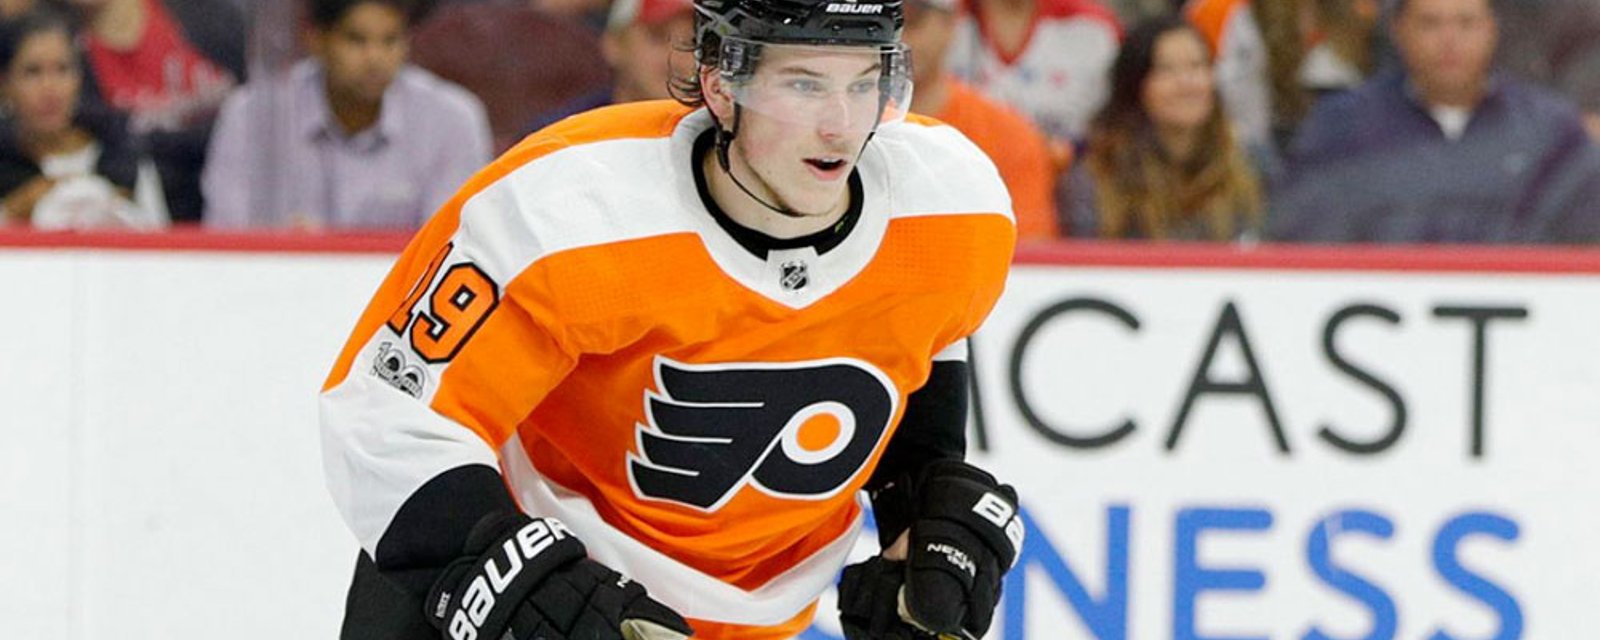 Breaking: Nolan Patrick diagnosed with rare disorder, will be out long-term